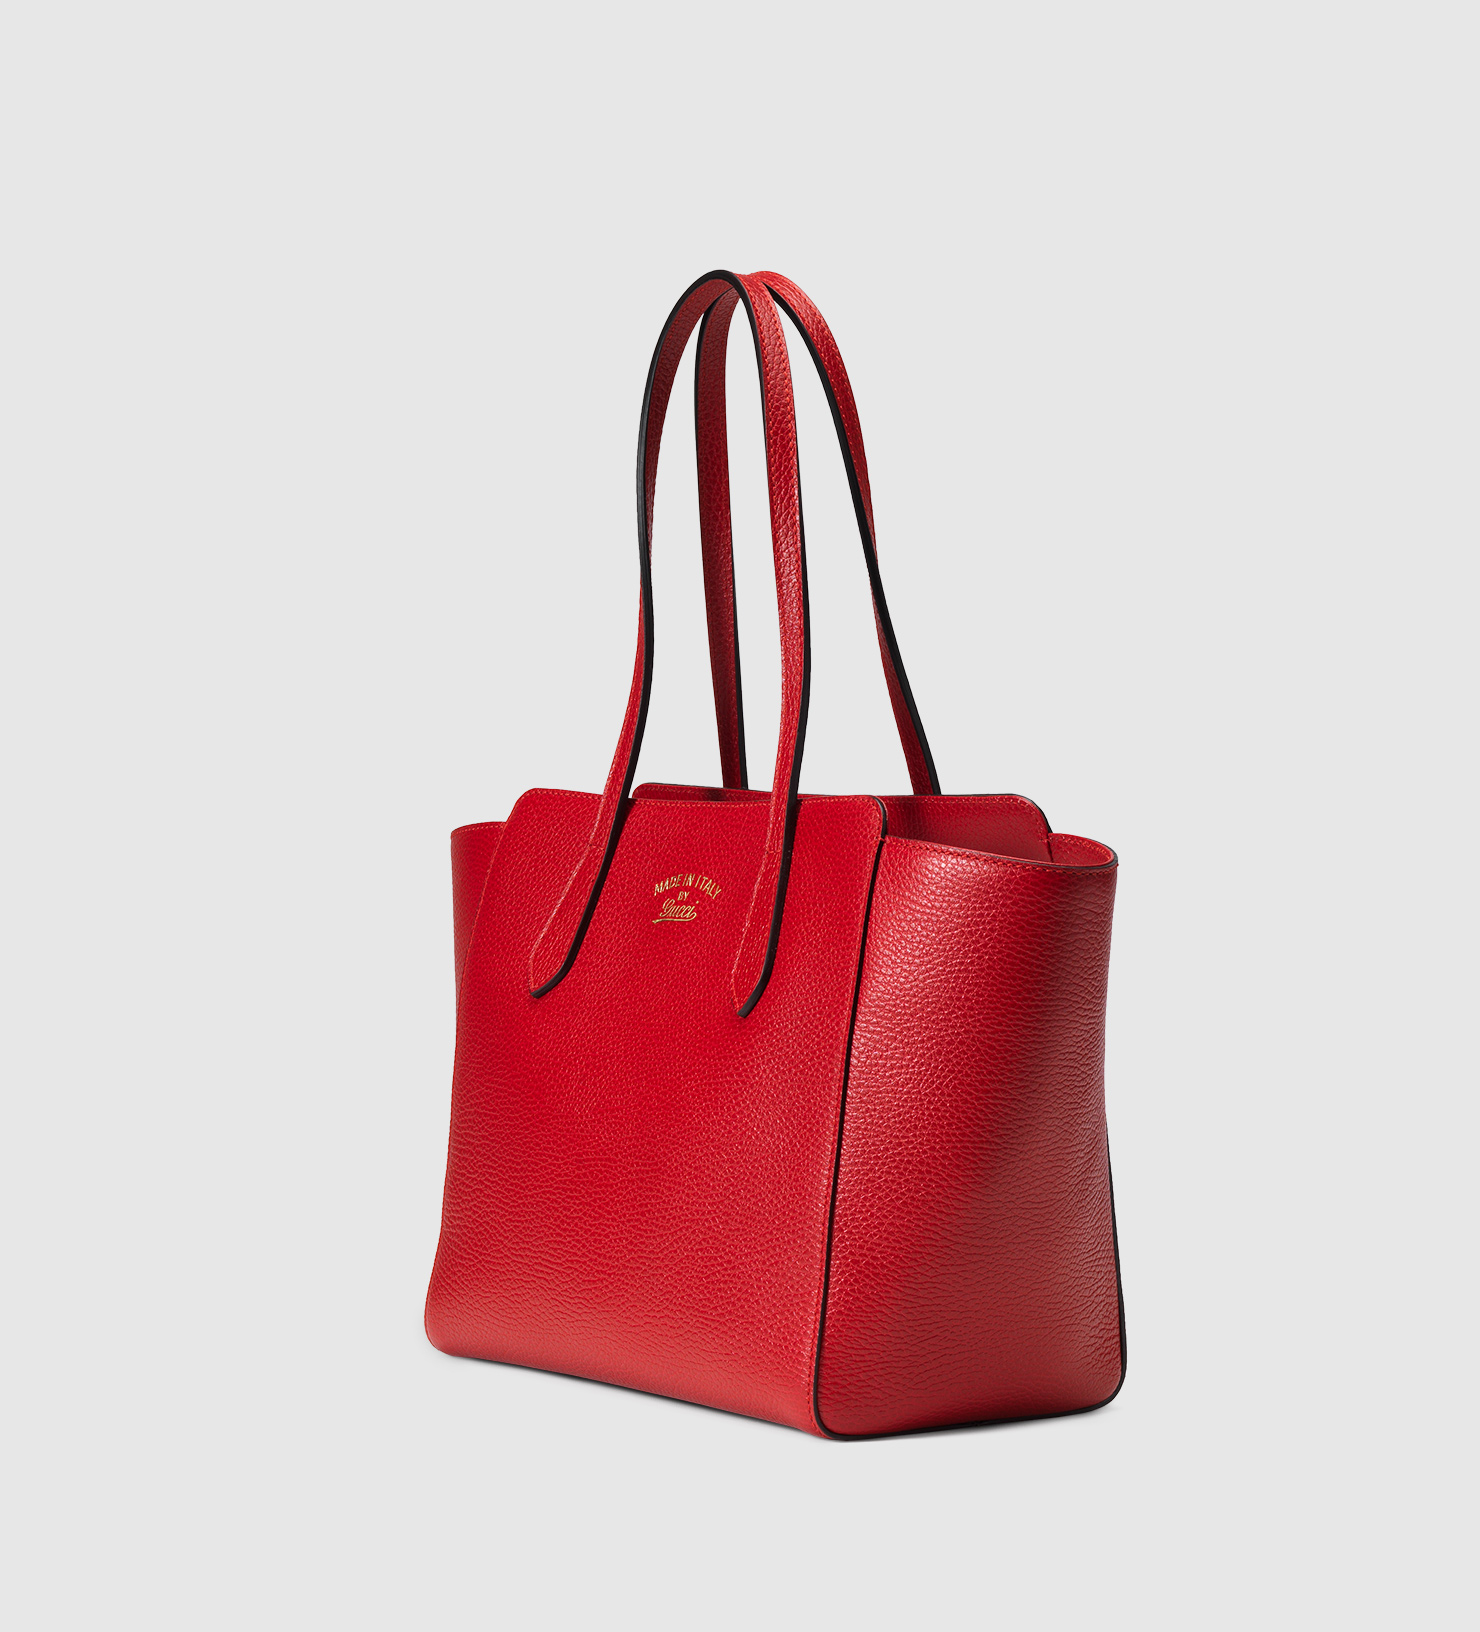 Lyst - Gucci Swing Medium Leather Tote in Red